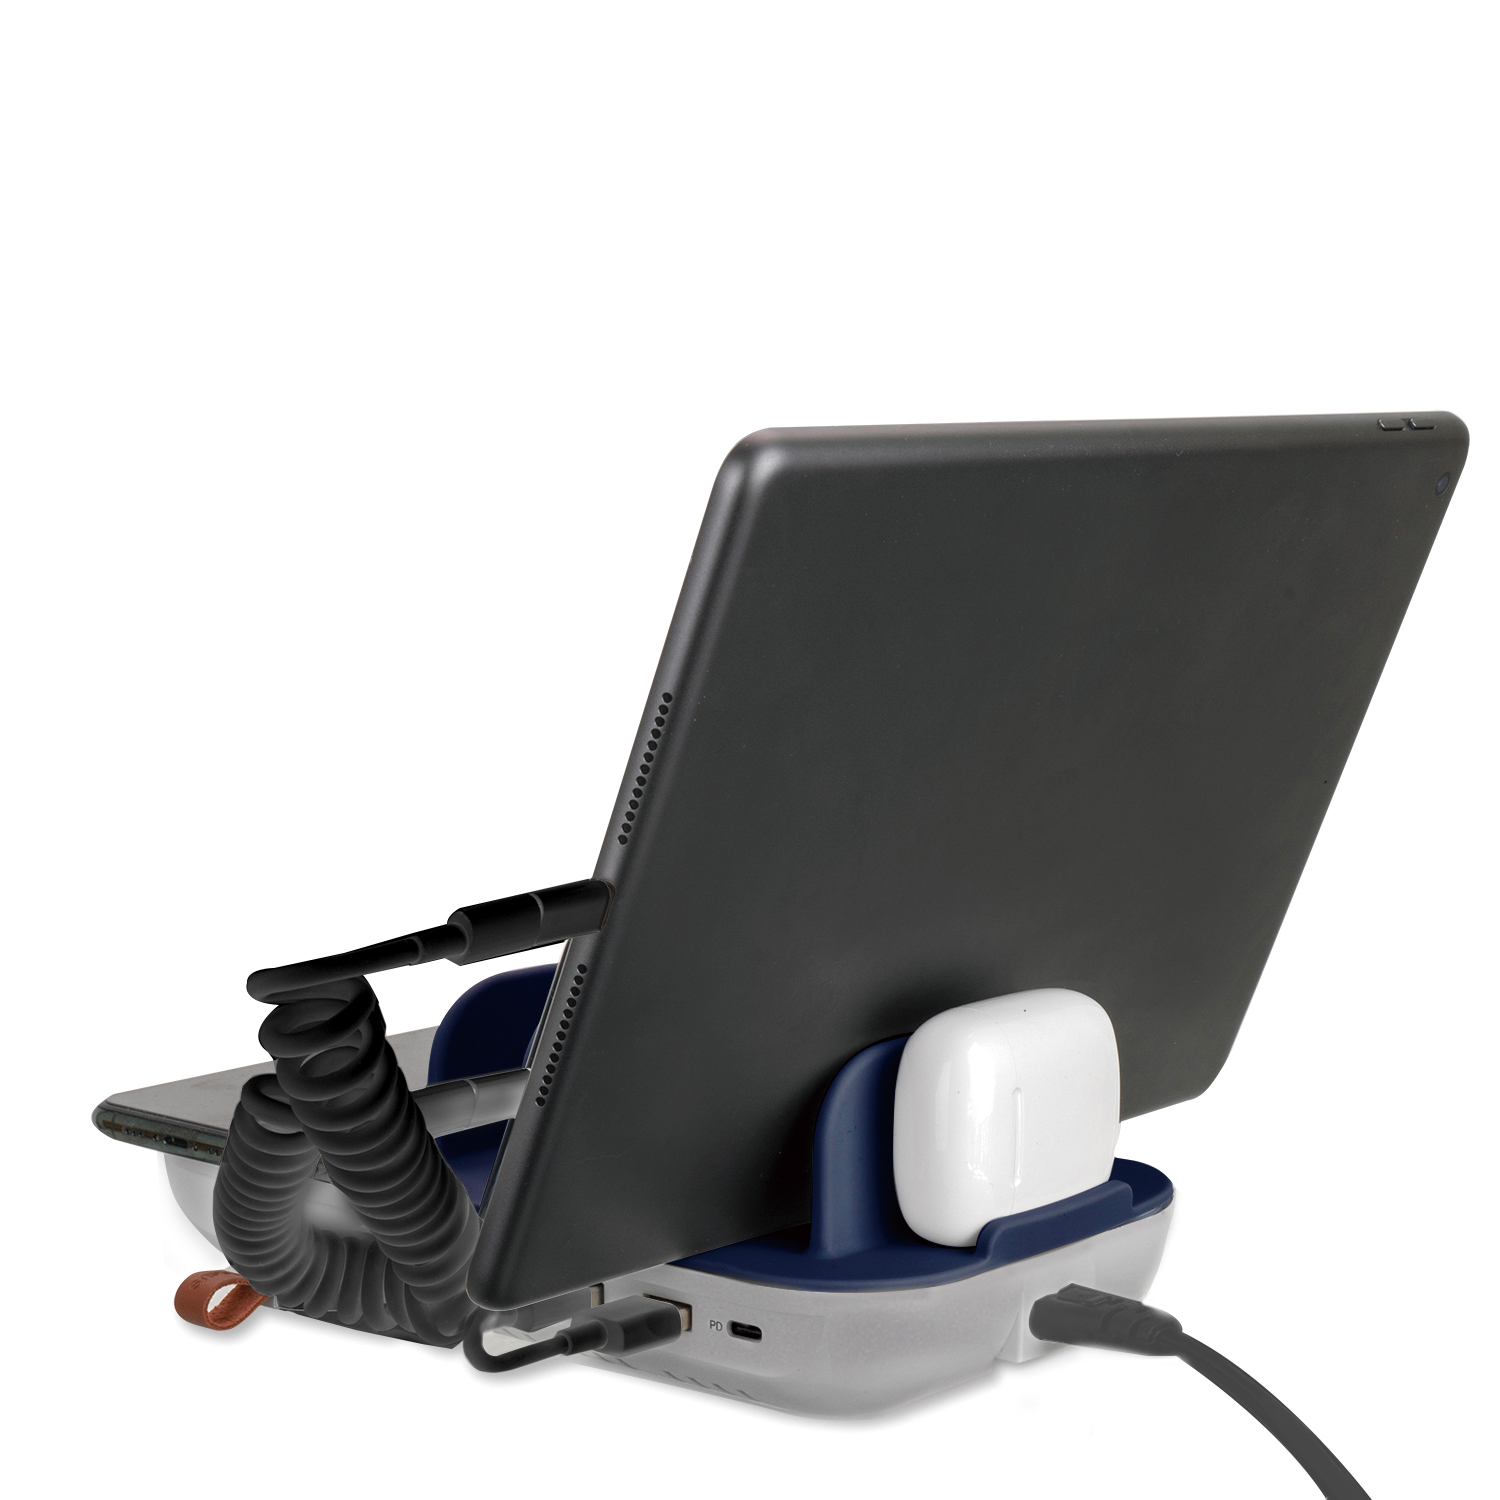 The USB charging station with Qi is a great way to charge your devices quickly and easily.